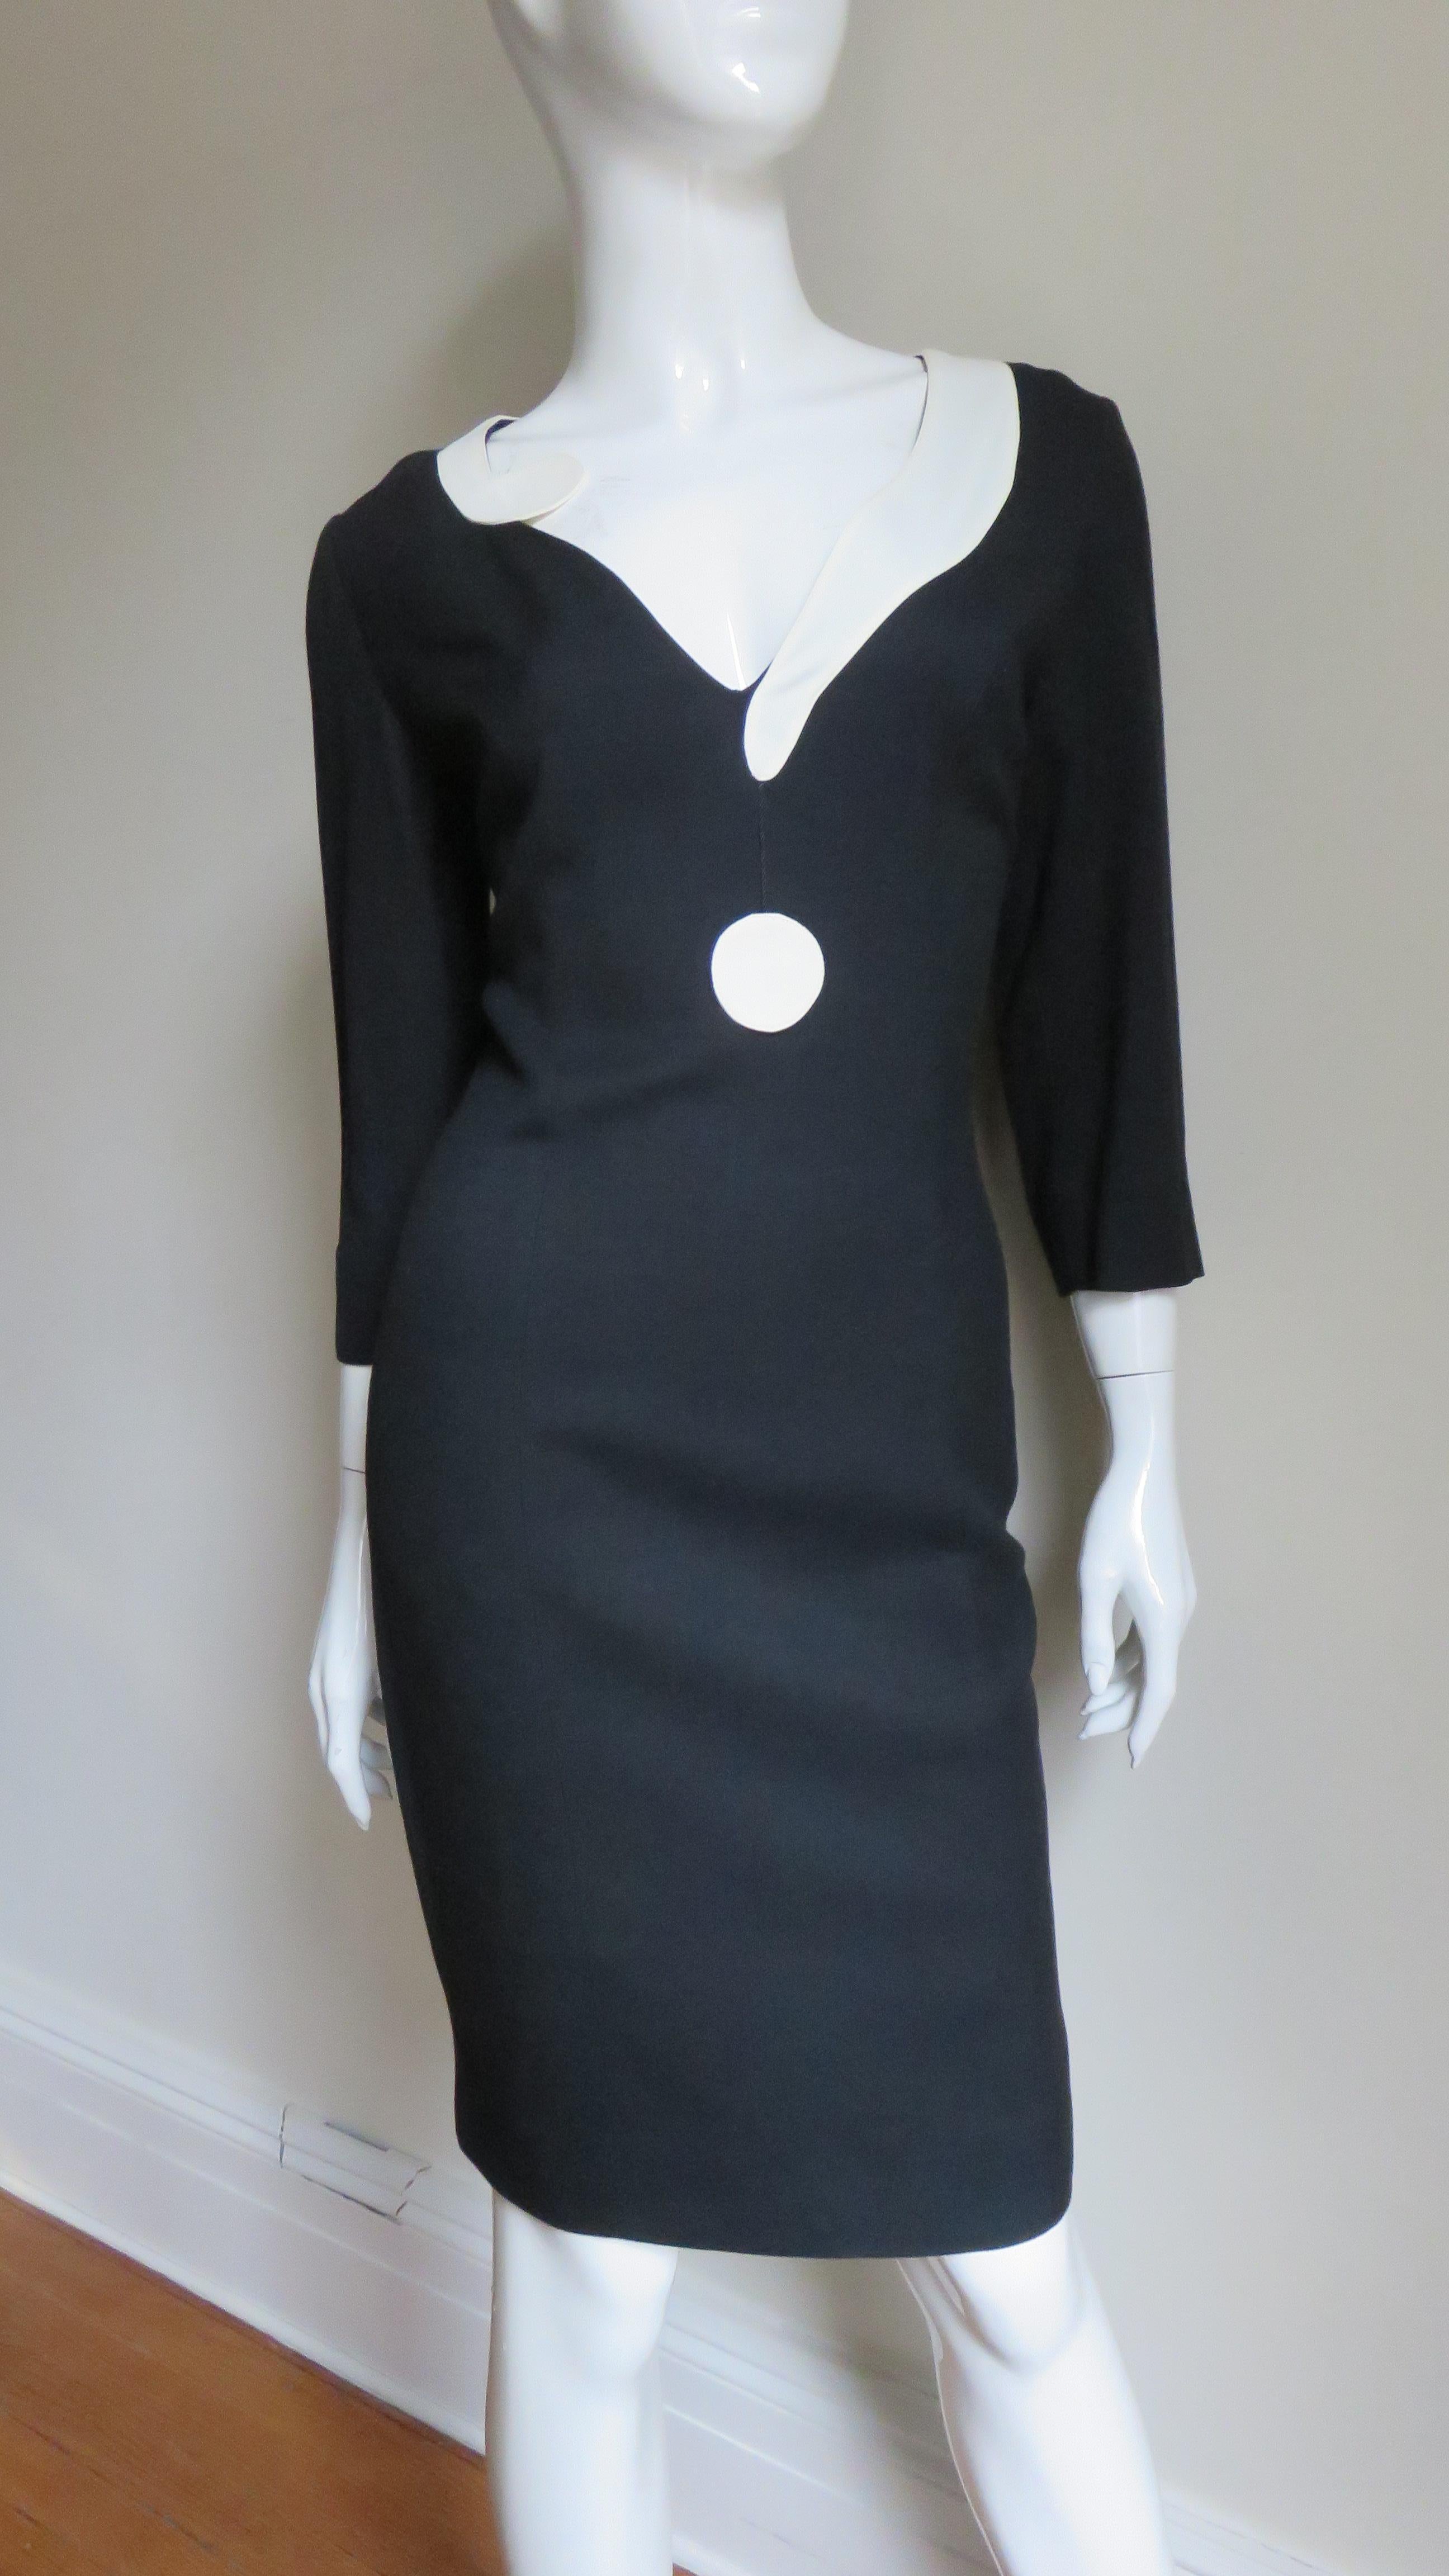 A fabulous black dress encircled around it's V neckline with an off white question mark with the dot of the question mark dangling cleverly below it.  The dress has 3/4 length sleeve and is semi fitted  with princess seaming for a great fit.  It is